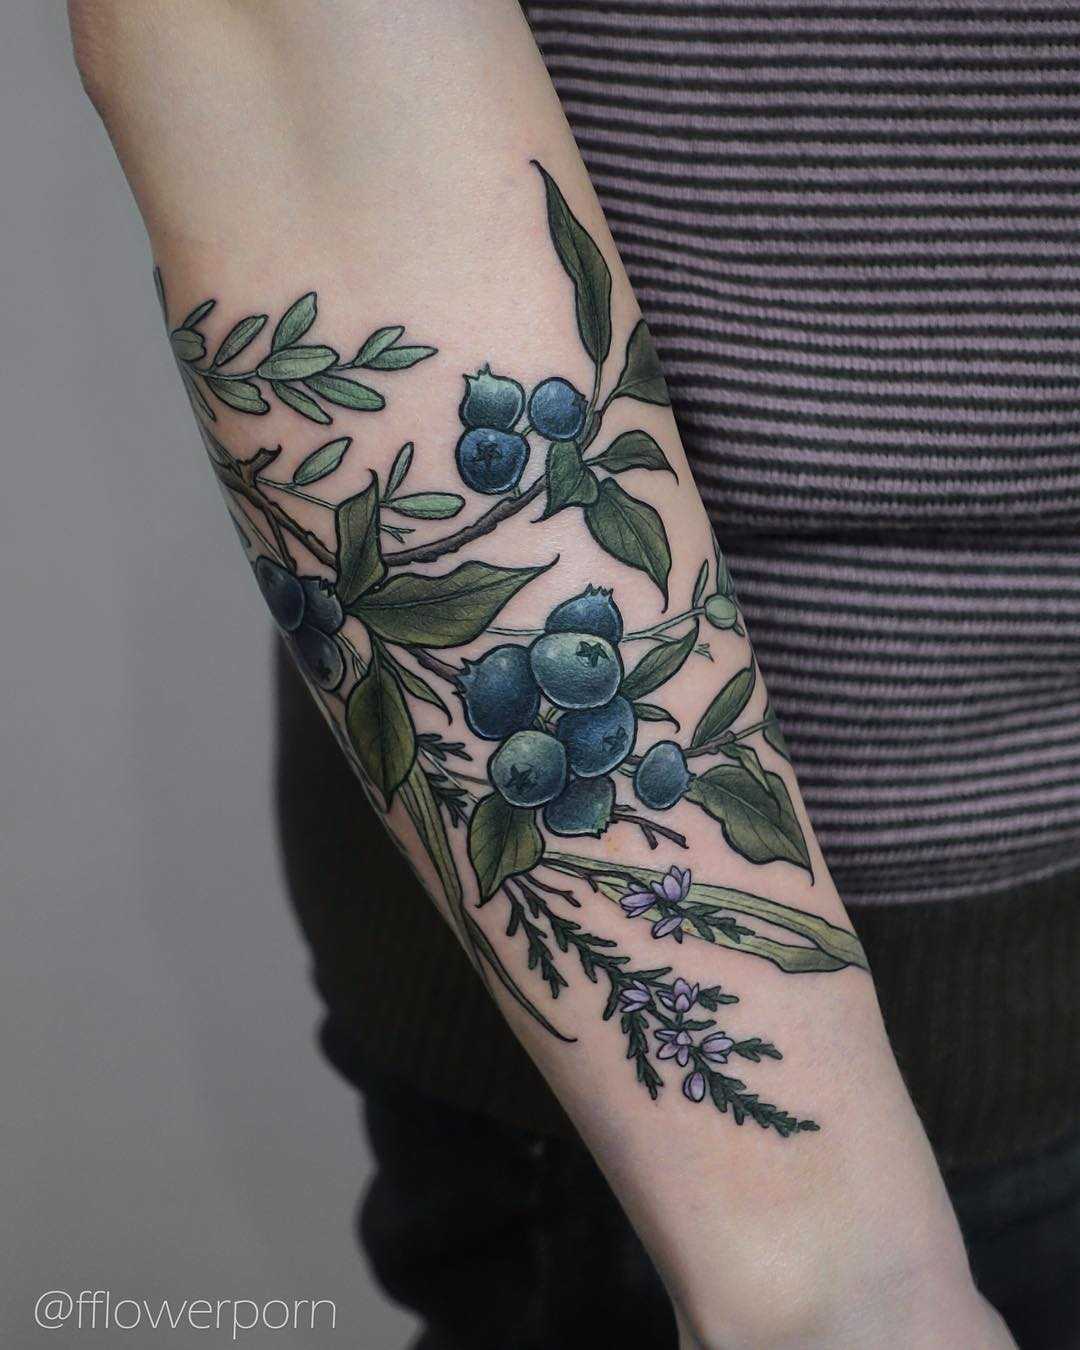 Blueberries and heather tattoo